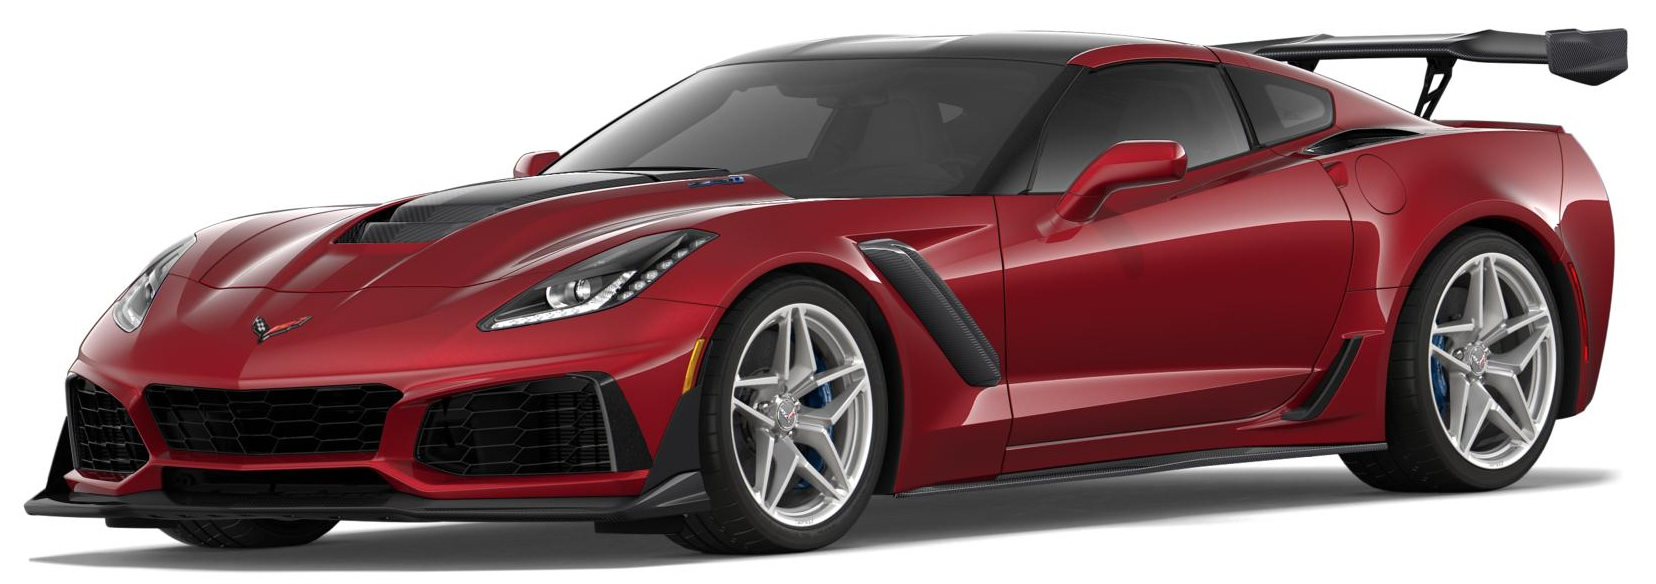 2019 Corvette ZR1 Coupe in Long Beach Red Metallic with the ZTK Track Performance Package